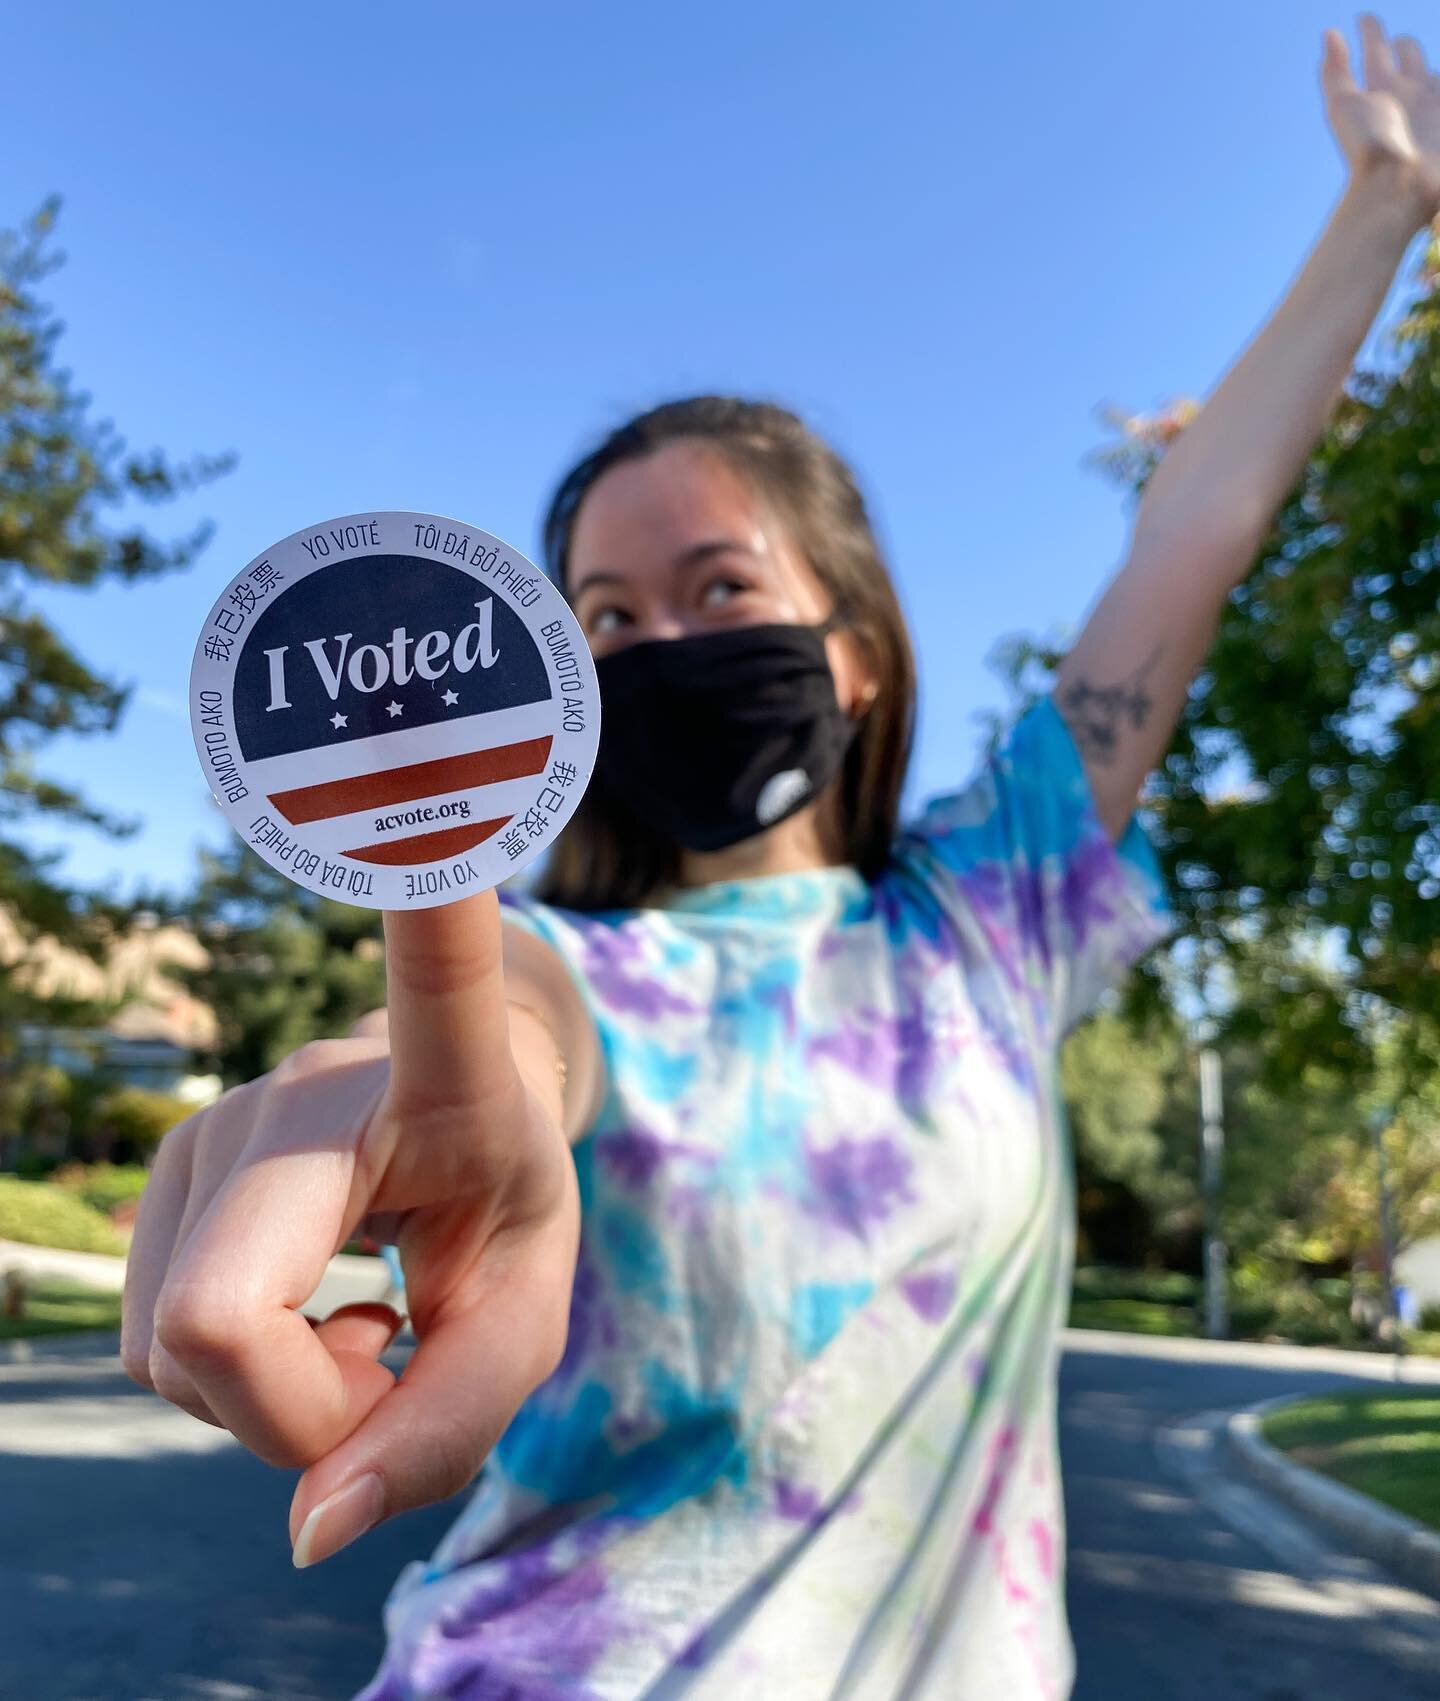 Go VOTE! If you haven&rsquo;t done so yet, polling places in CA close at 8pm today! Check out ballotpedia.org or vote.org for more information about your states polling locations!
It&rsquo;s important that your voice is heard during such a crucial ti